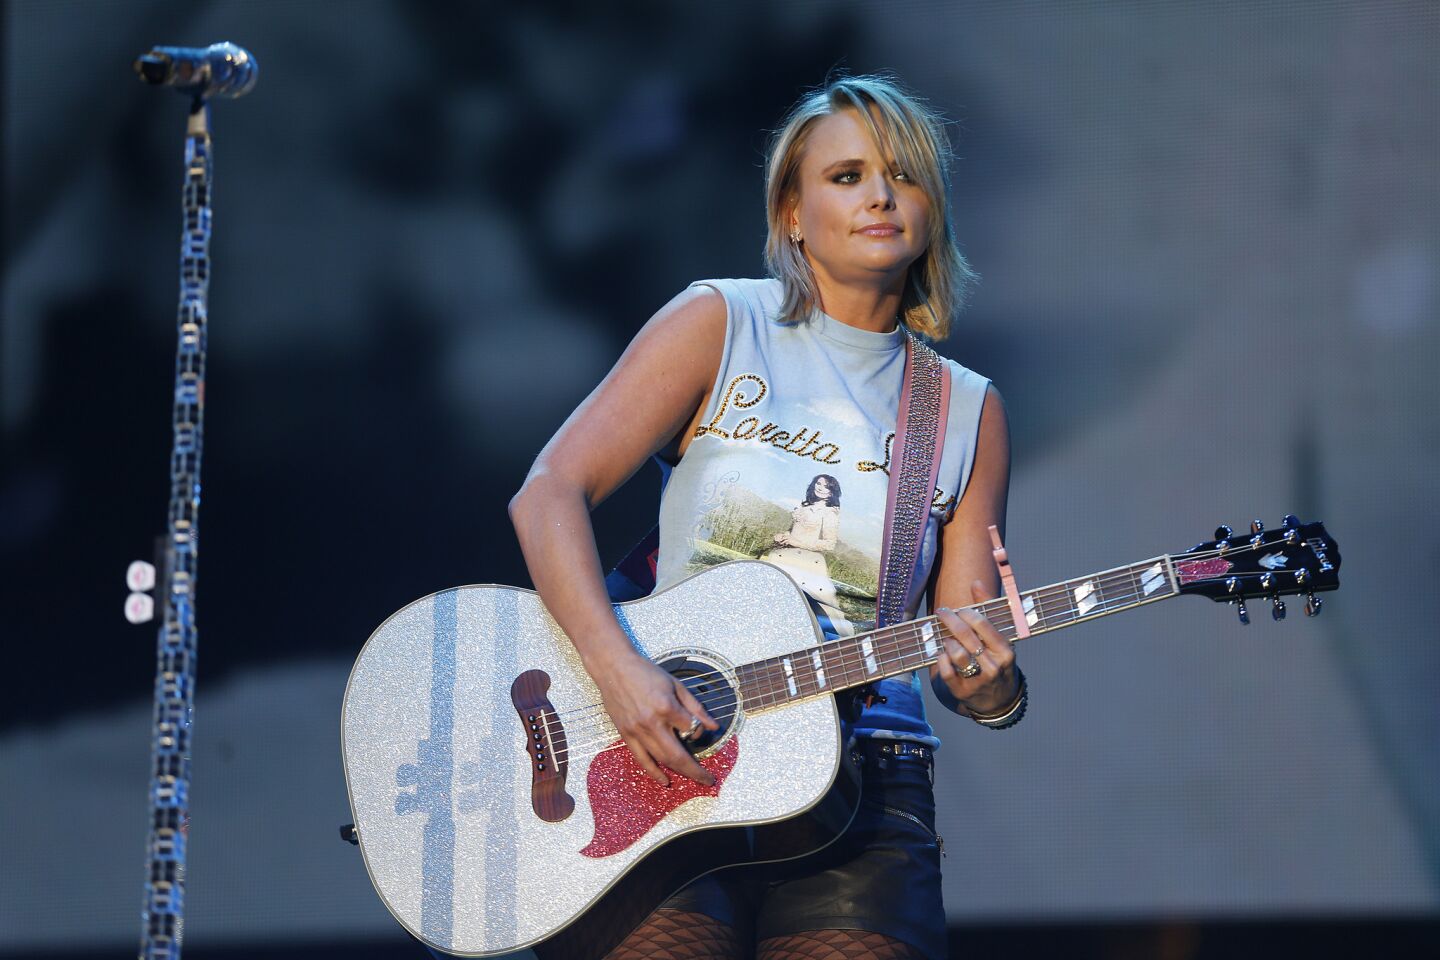 Miranda Lambert performs on the Mane Stage at Stagecoach Country Music Festival at the Empire Polo Club in Indio on April 25.